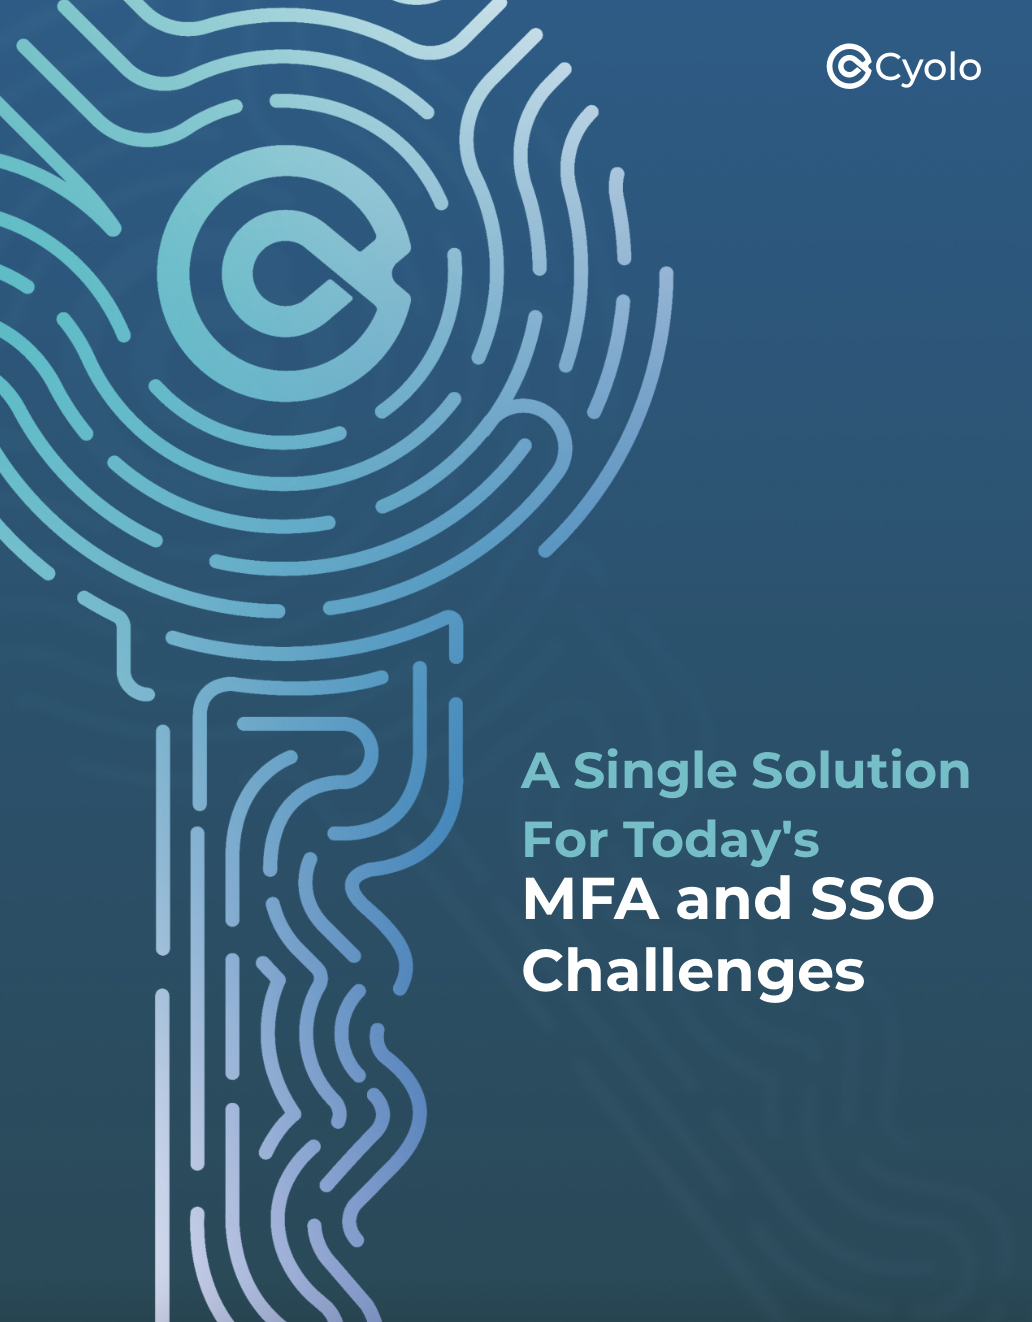 A Single Solution For TodaysMFA and SSO Challenges